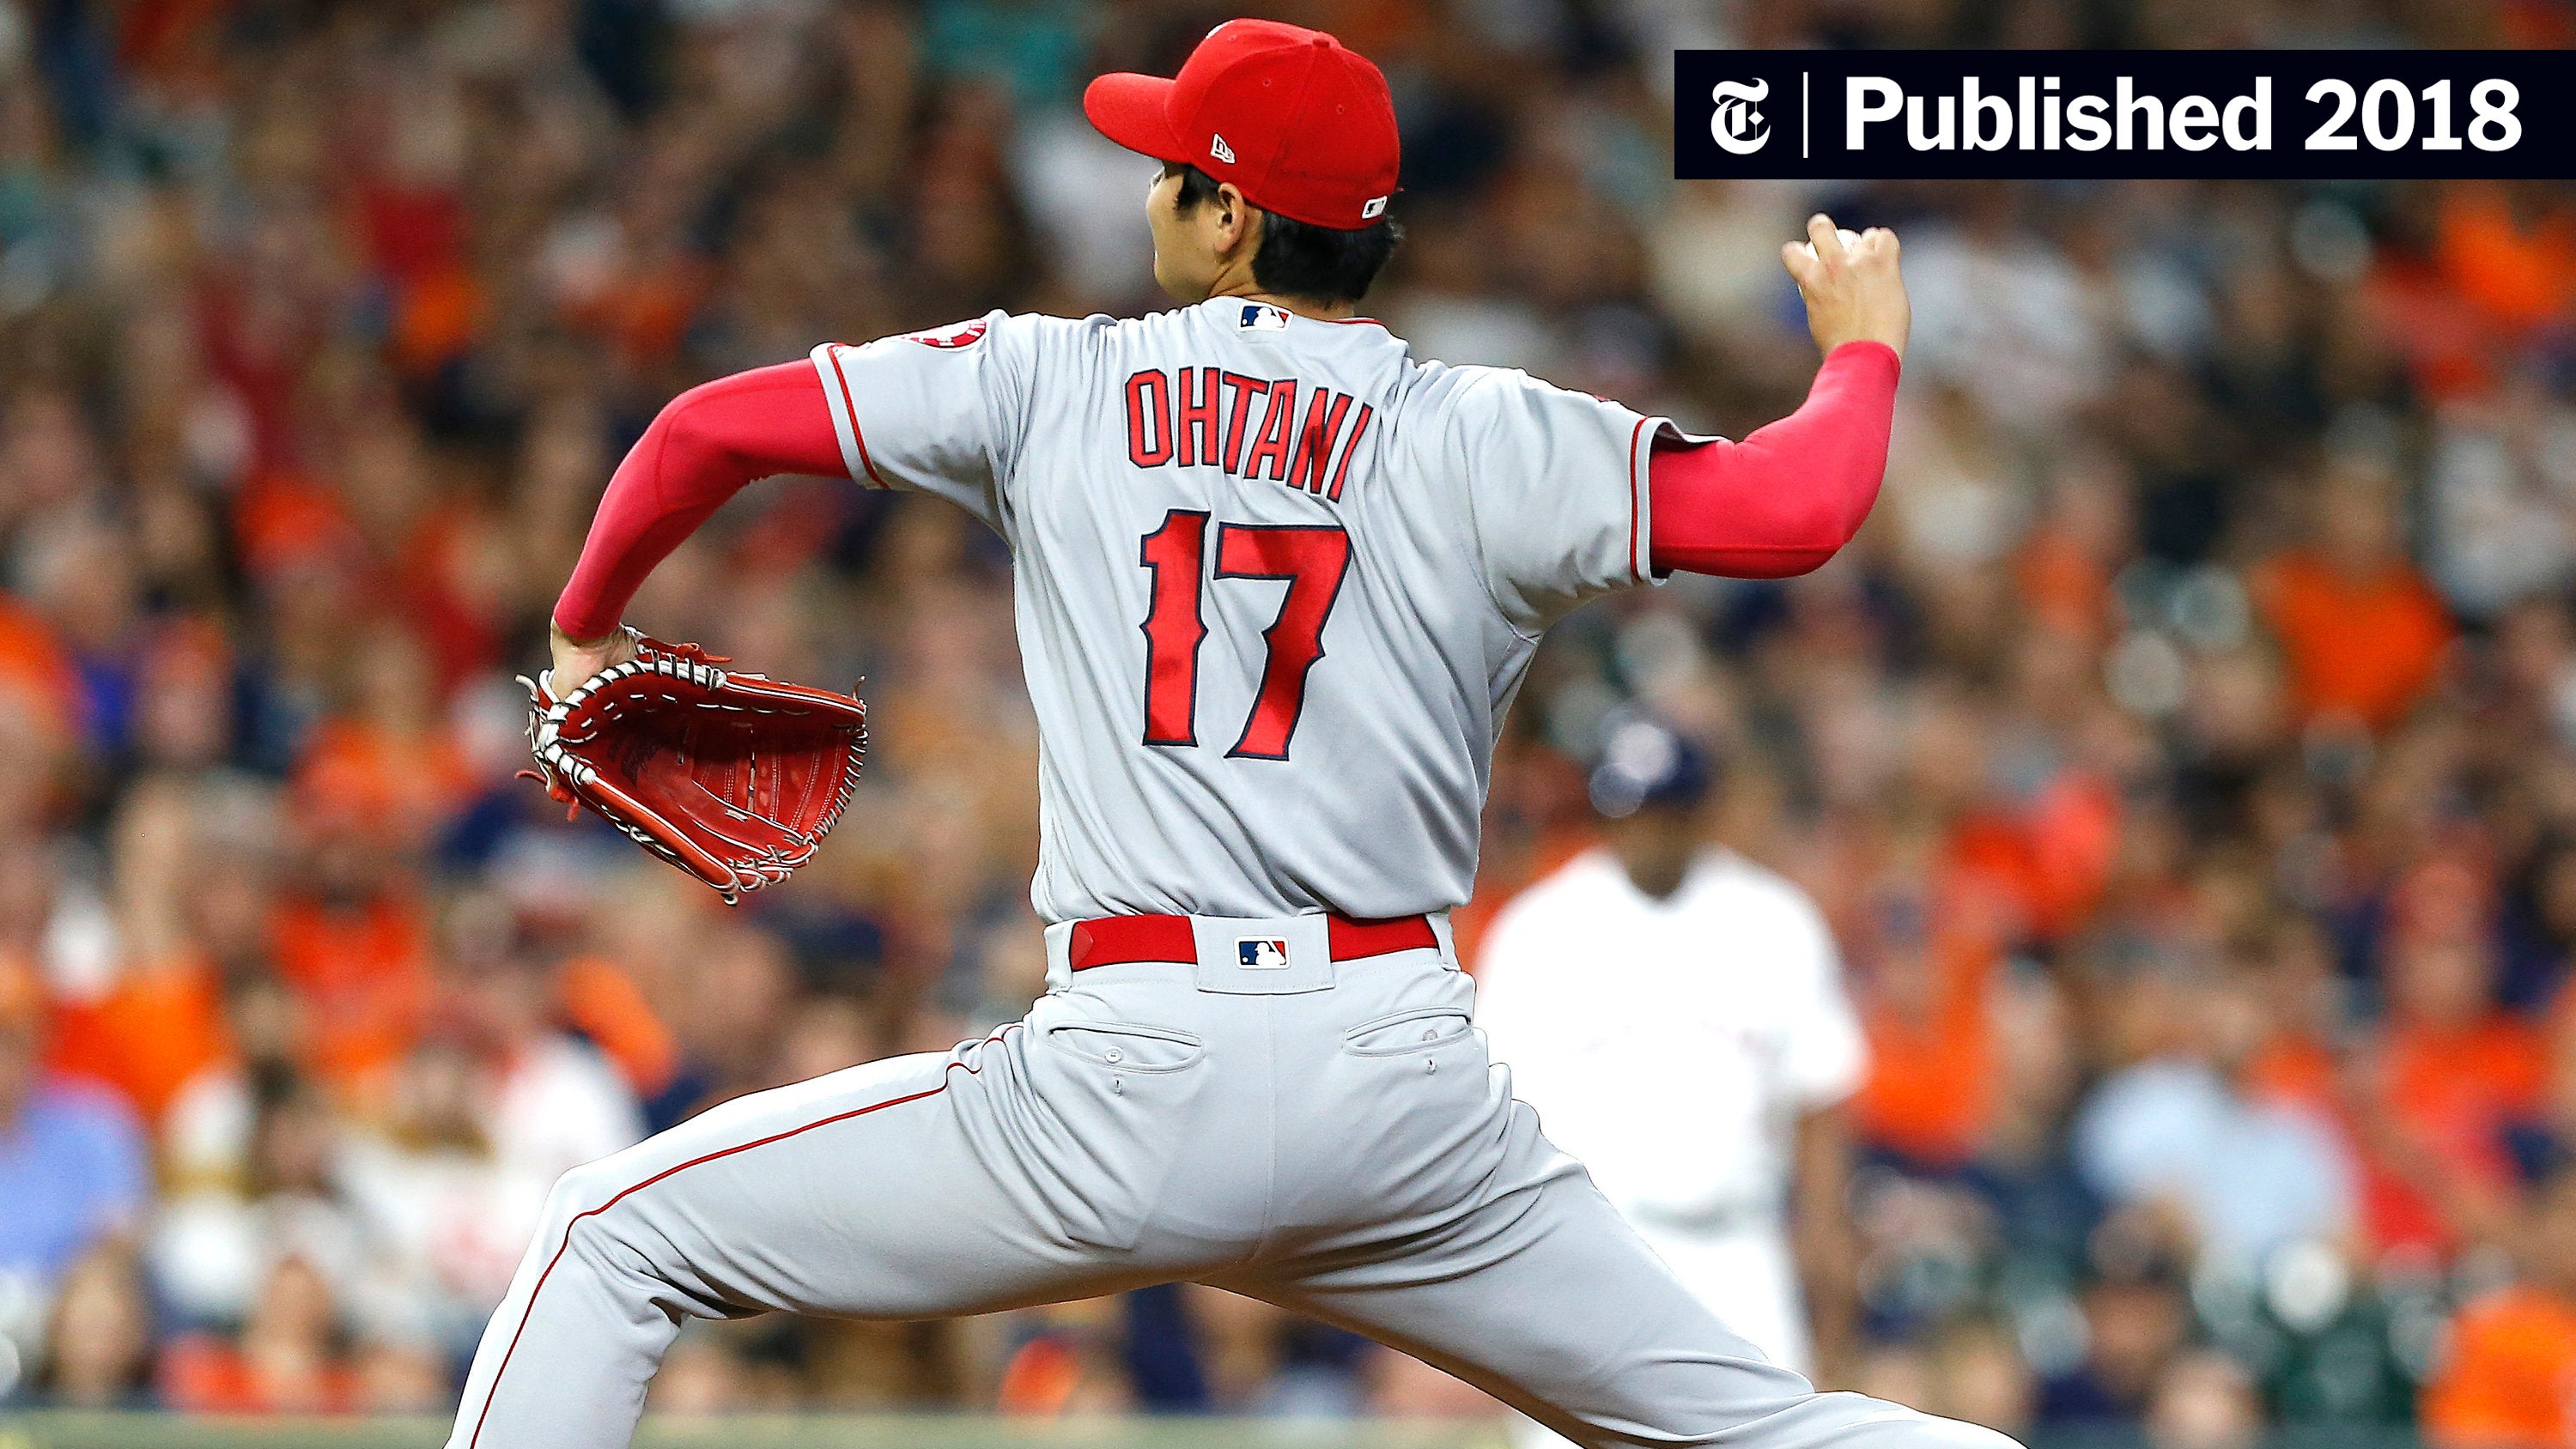 The shohei ohtani hype was real and so were the injury fears